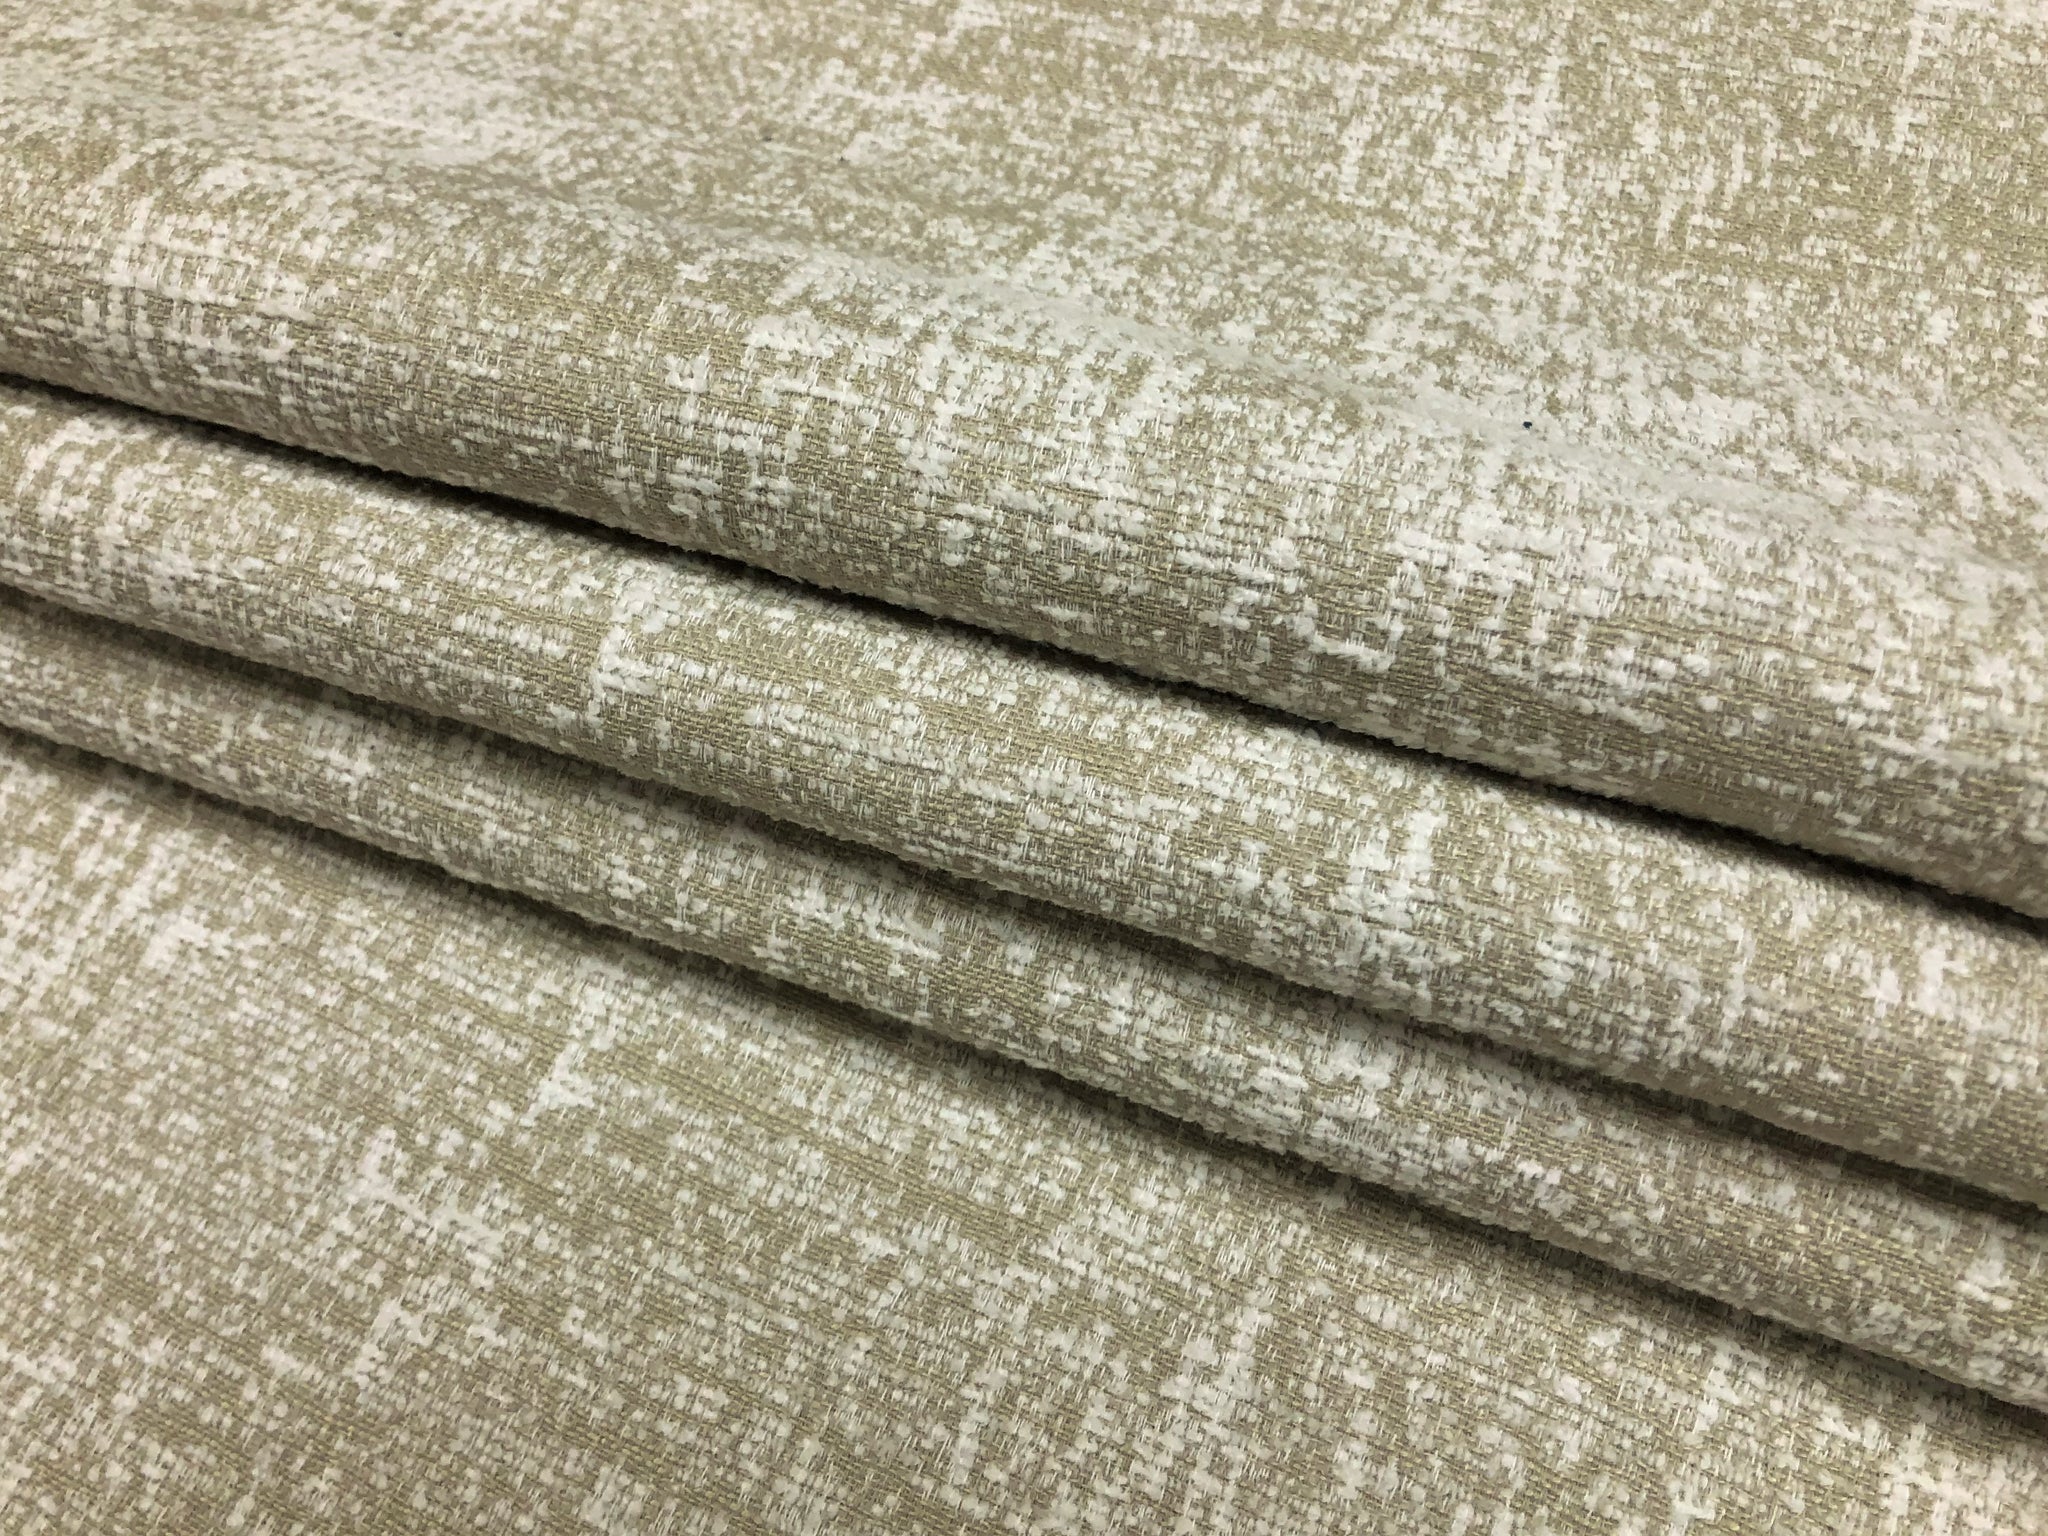 Waltz Wet Look Chenille Upholstery Fabric - Blush